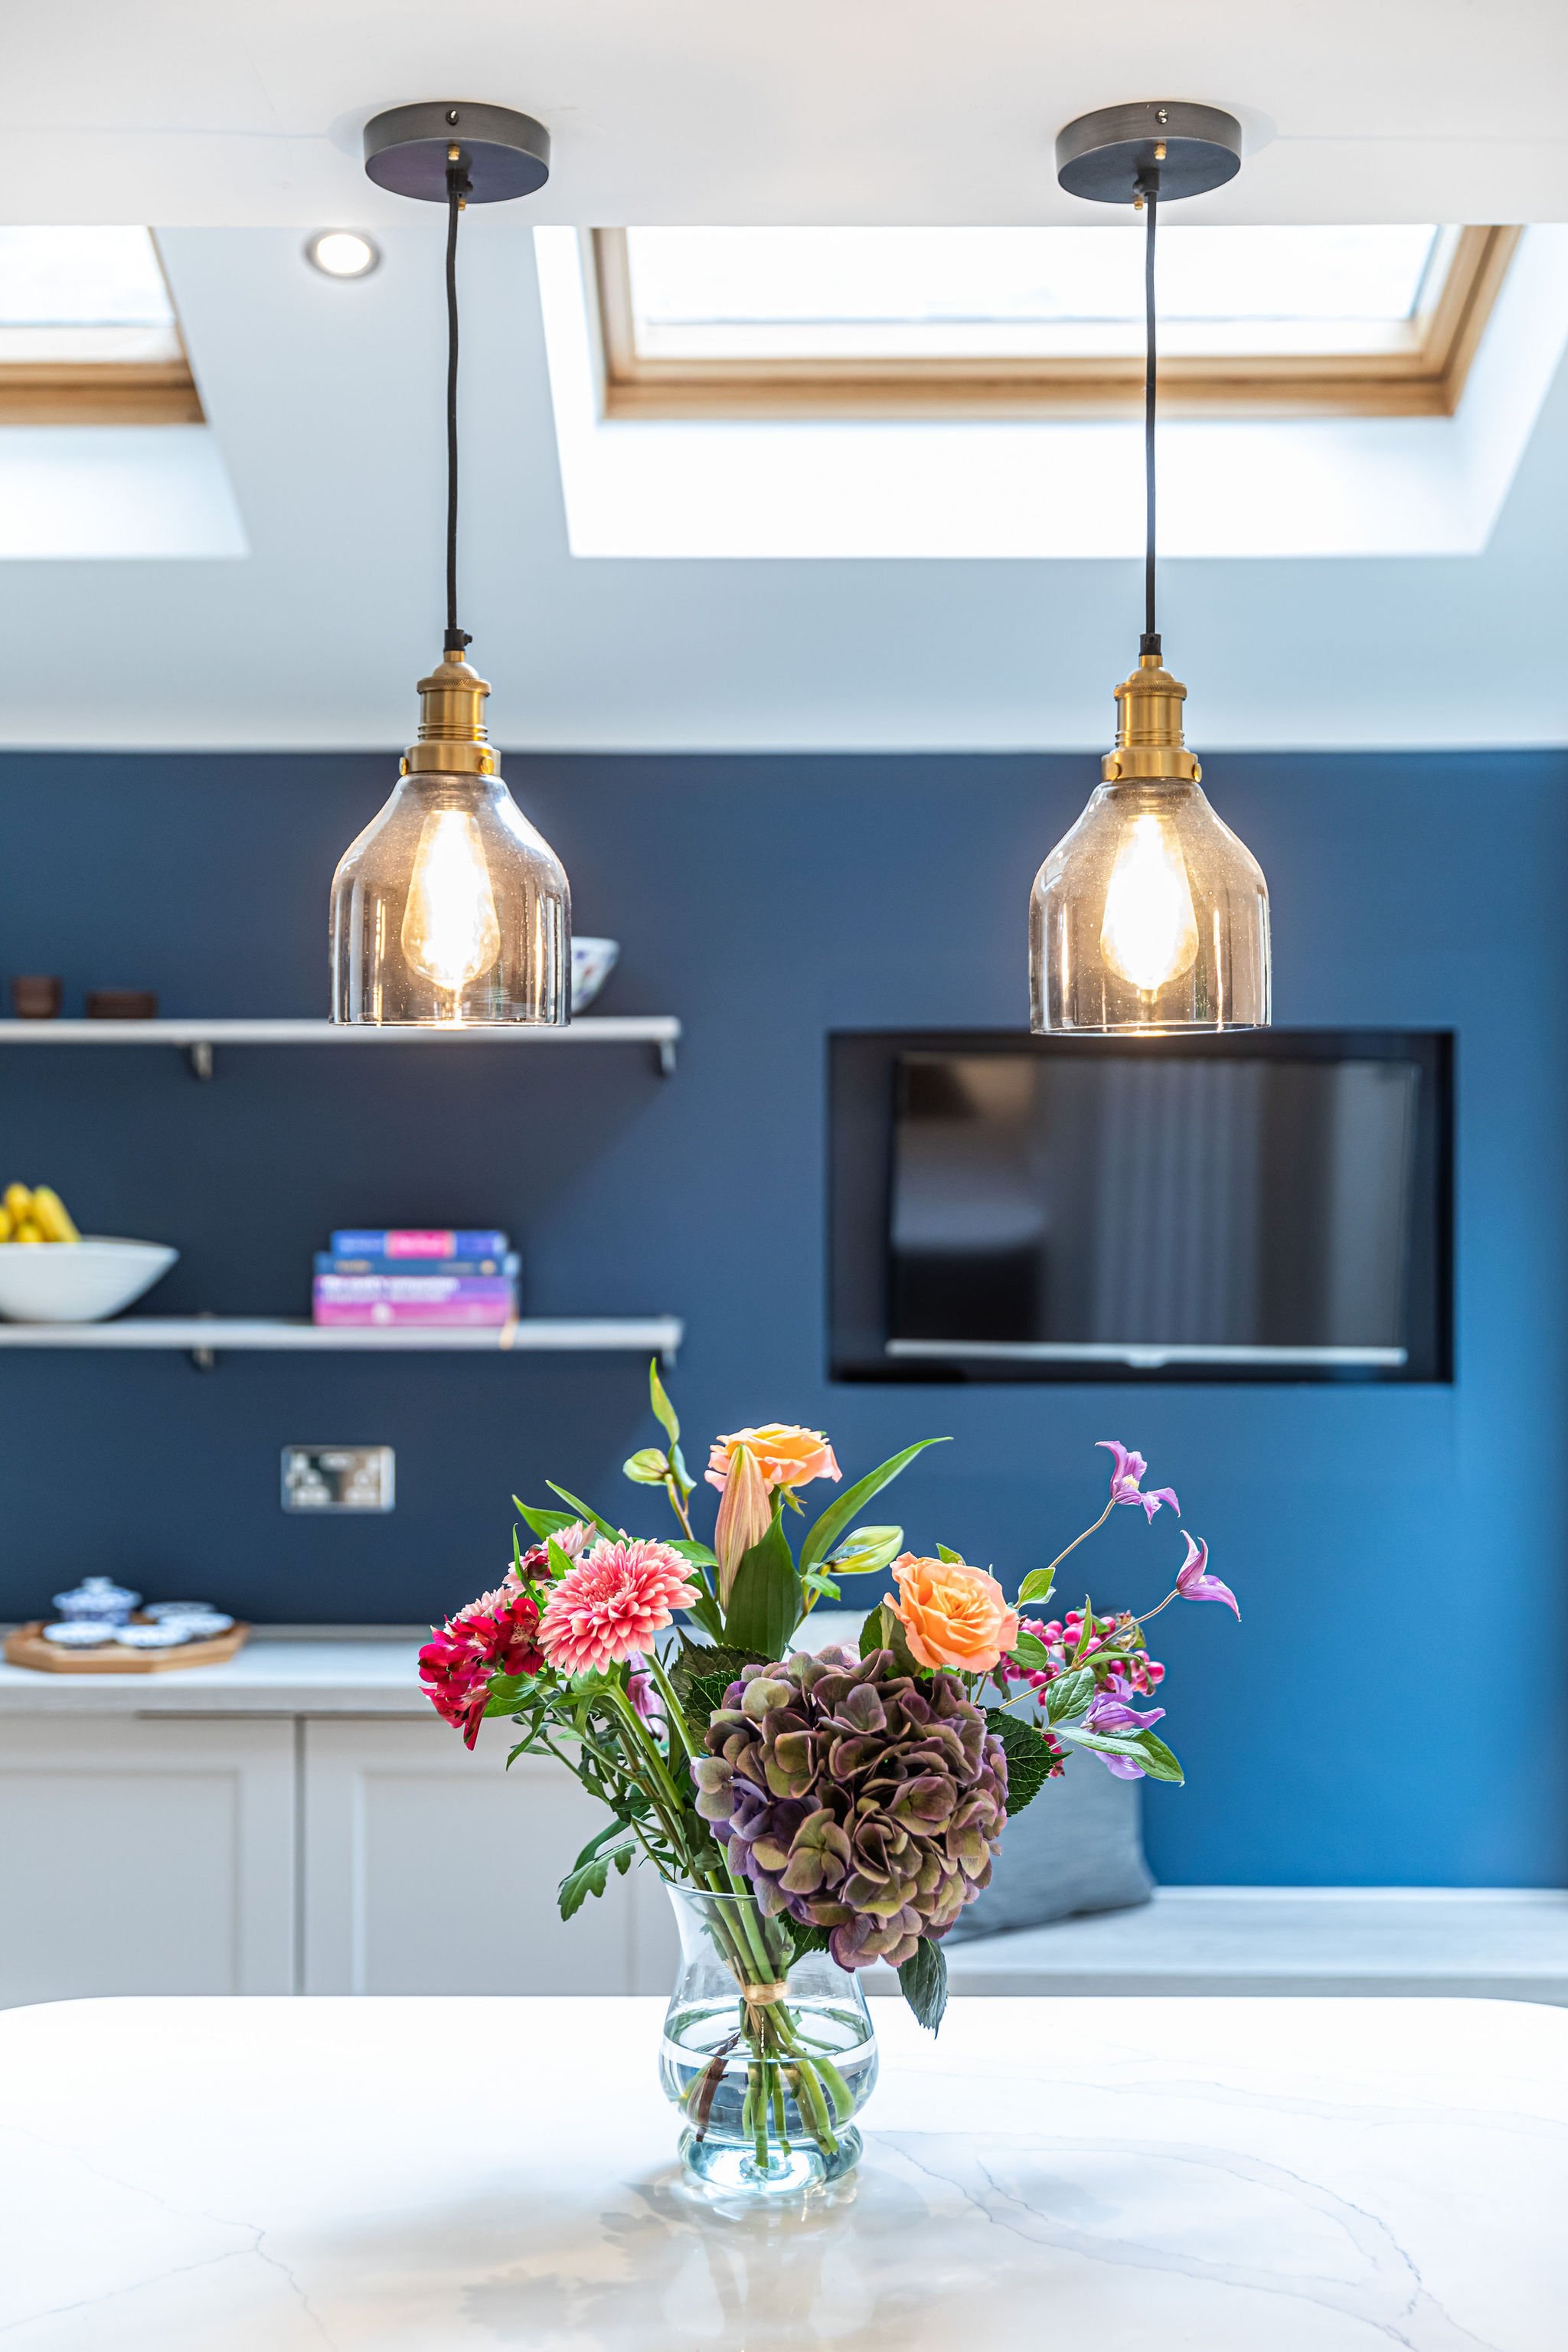 Flowers and blue wall Orsetto Interiors by Alessandra Garcia Kitchen light and bright interiors design.jpg